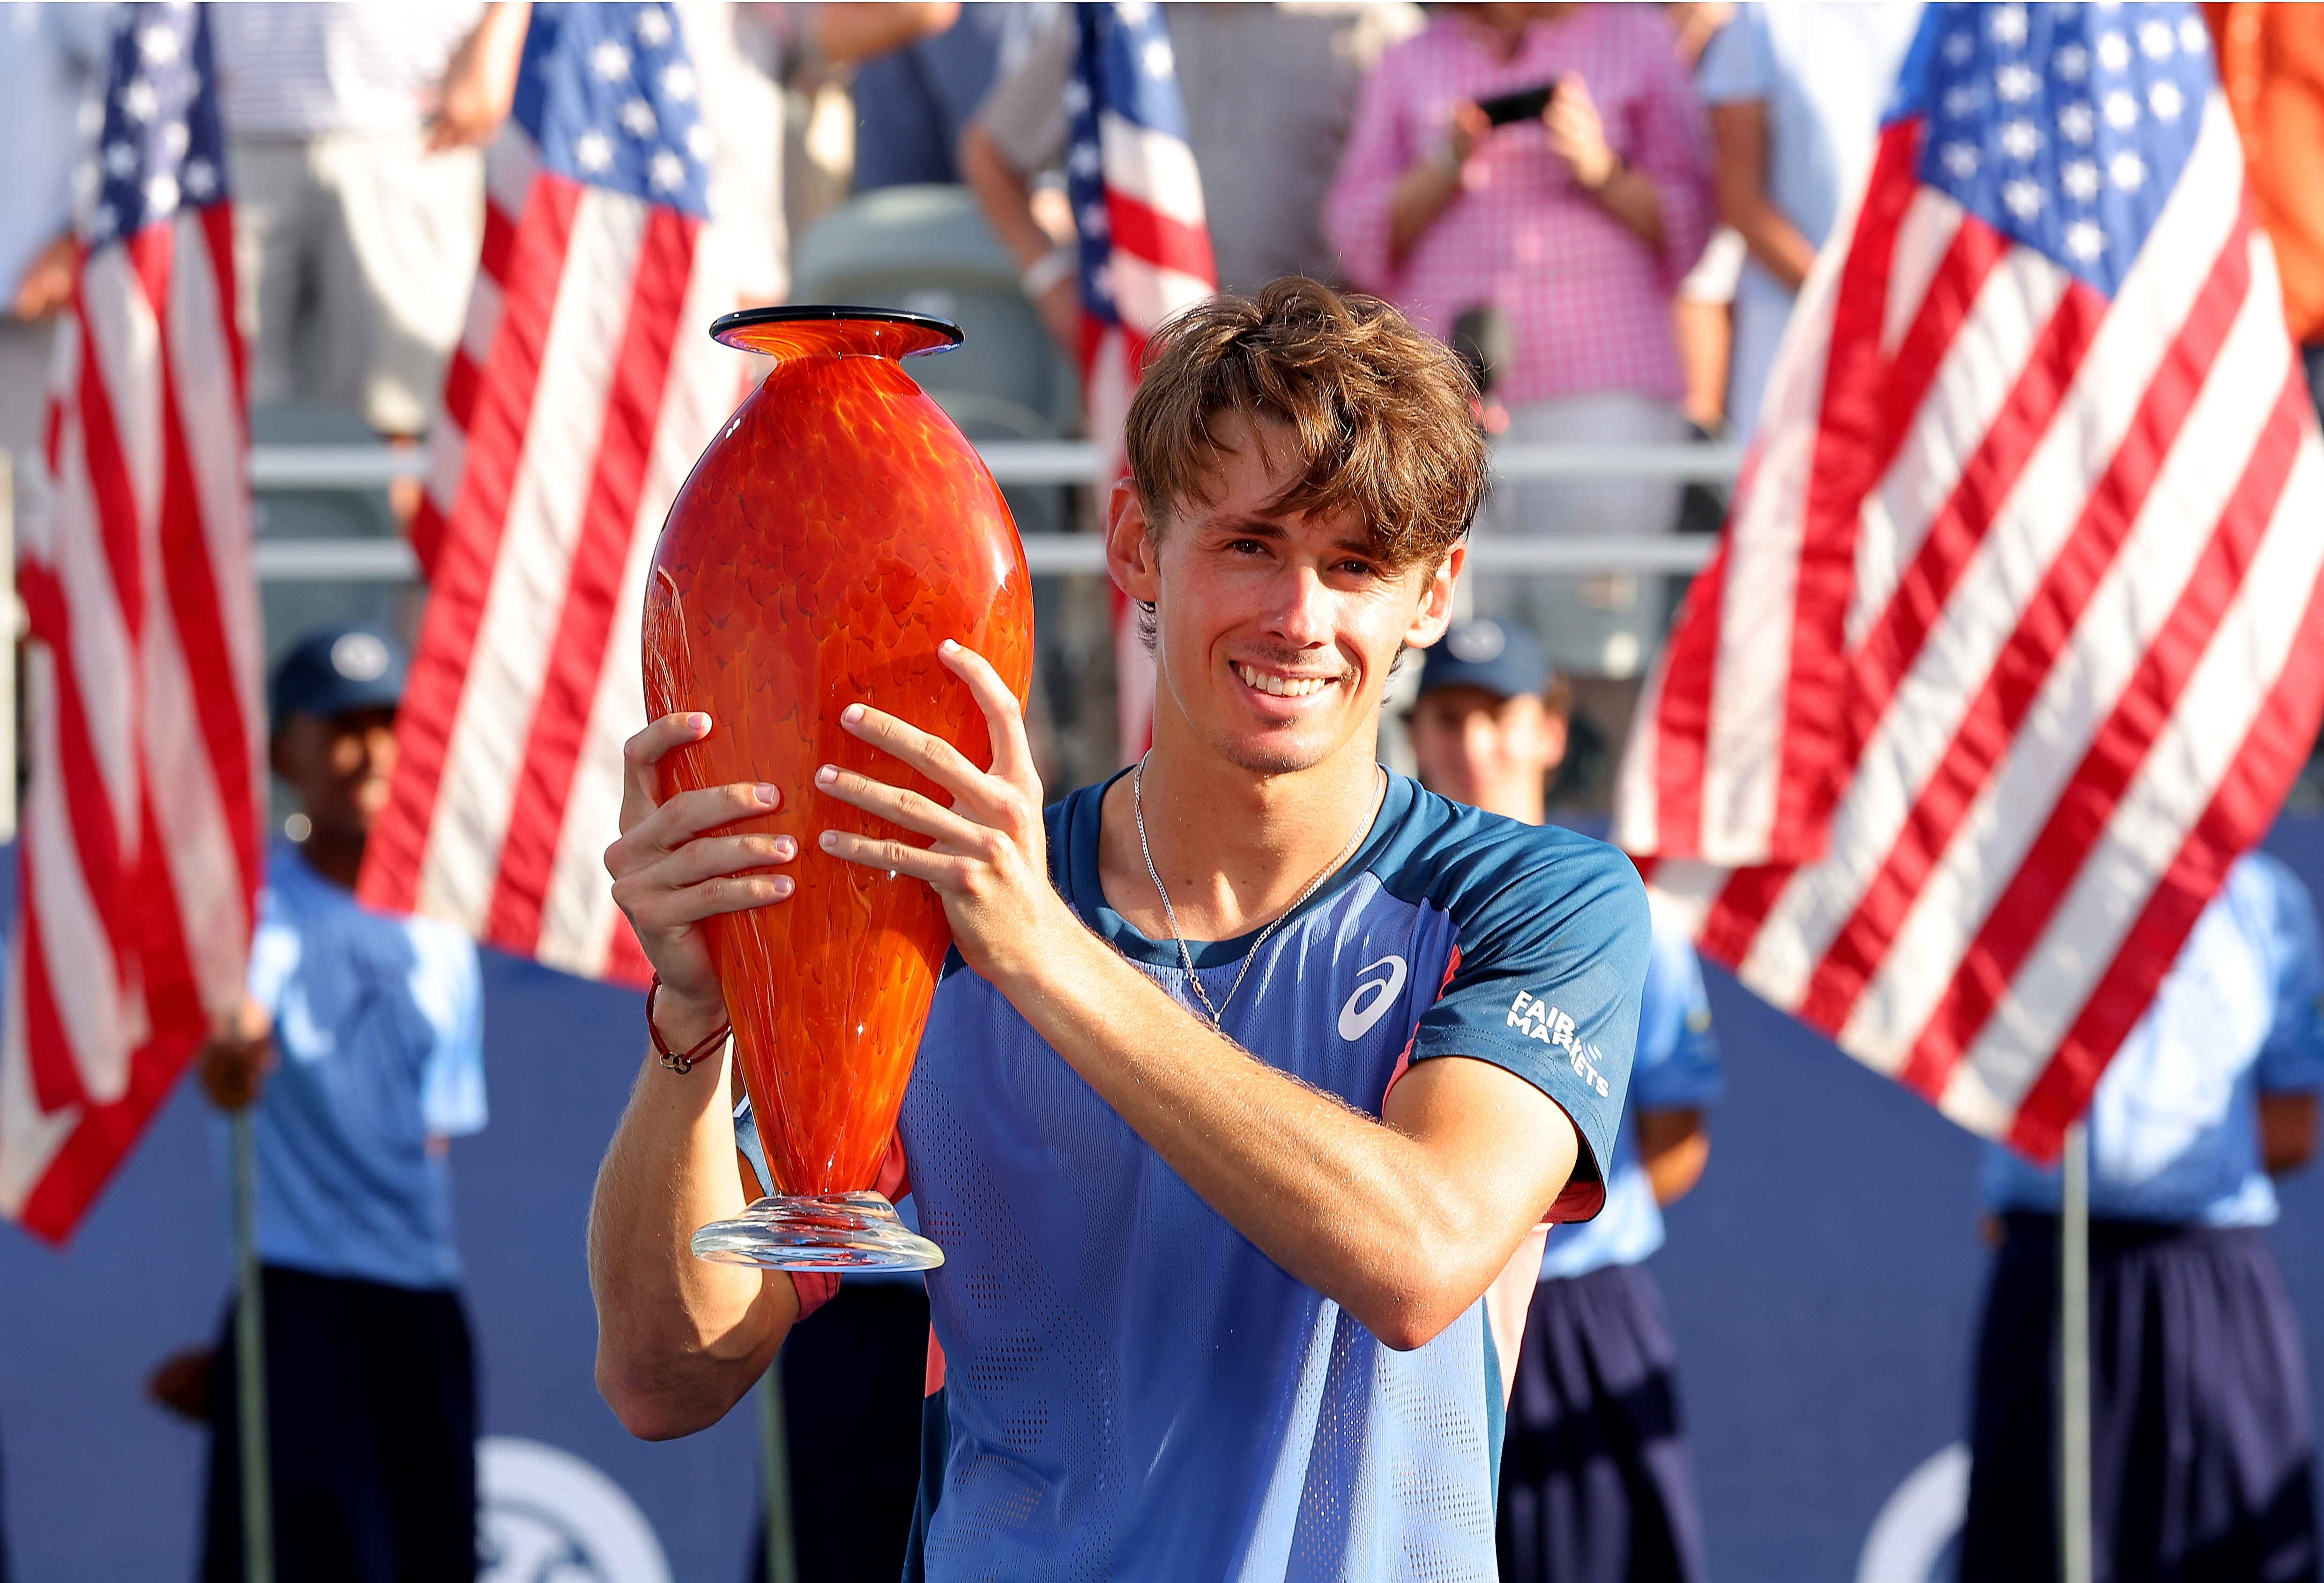 Alex de Minaur of Australia poses with the trophy after defeating Jenson Brooksby in the singles final of the Atlanta Open at Atlantic Station on July 31, 2022 in Atlanta, Georgia. (Photo by Kevin C. Cox/Getty Images)